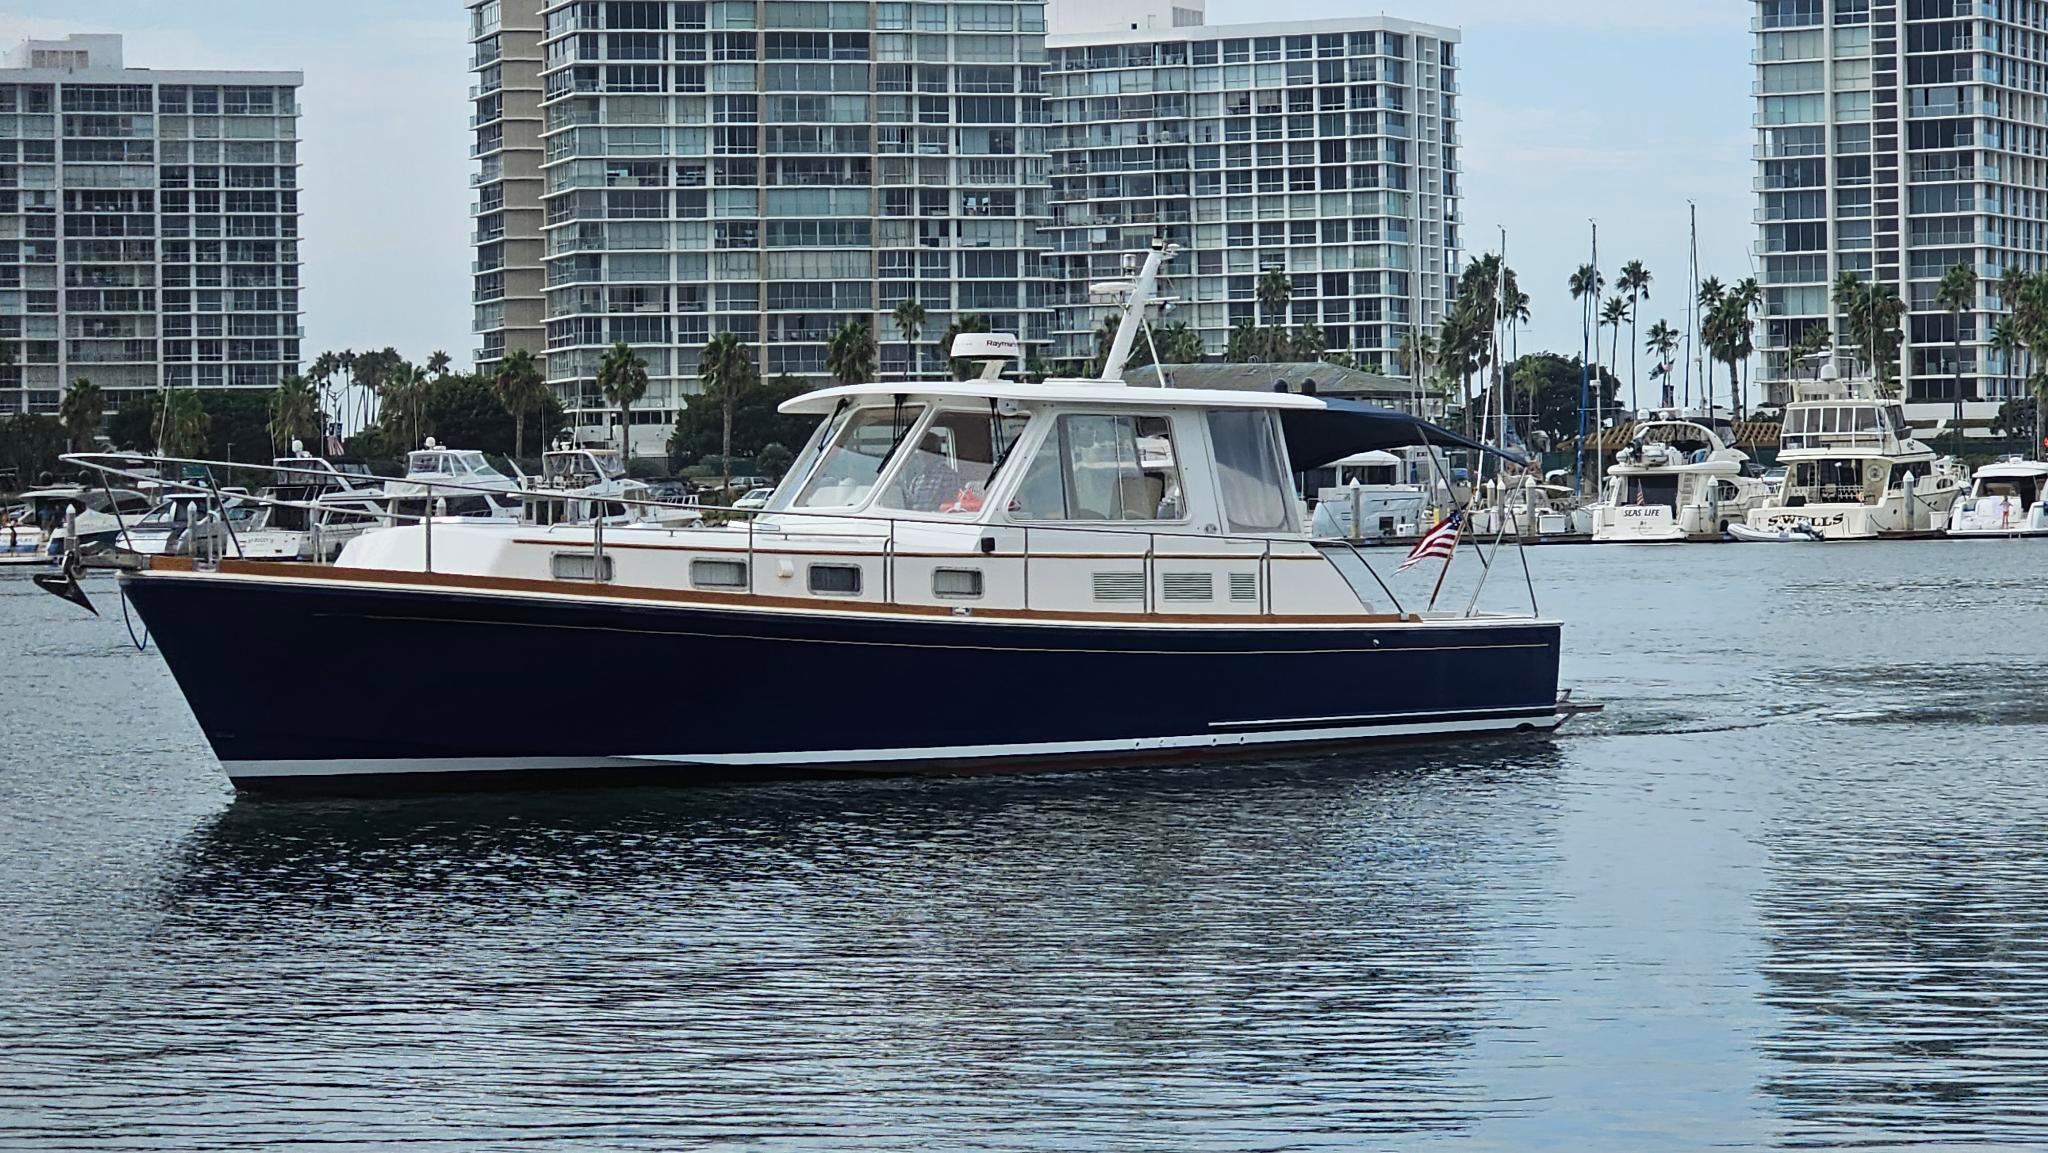 2001 Grand Banks Eastbay 43 CIAO BELLA | 43ft